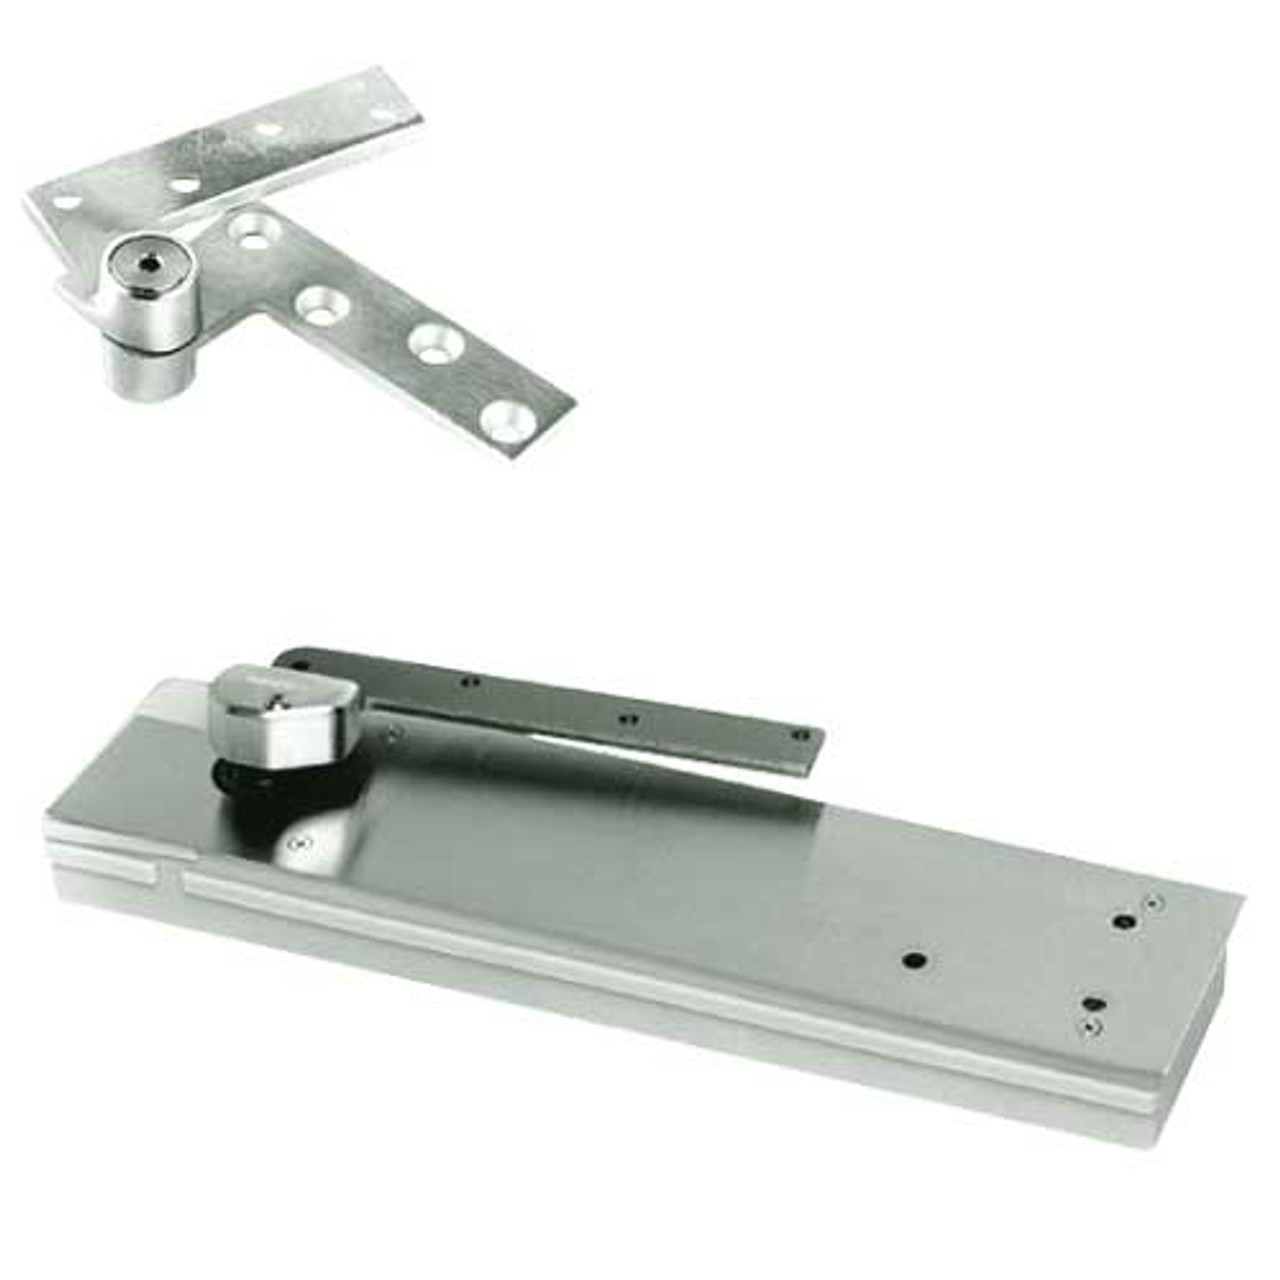 5104ABC180-LFP-LCC-LH-618 Rixson 51 Series 3/4" Offset Hung Shallow Depth Floor Closers in Bright Nickel Finish